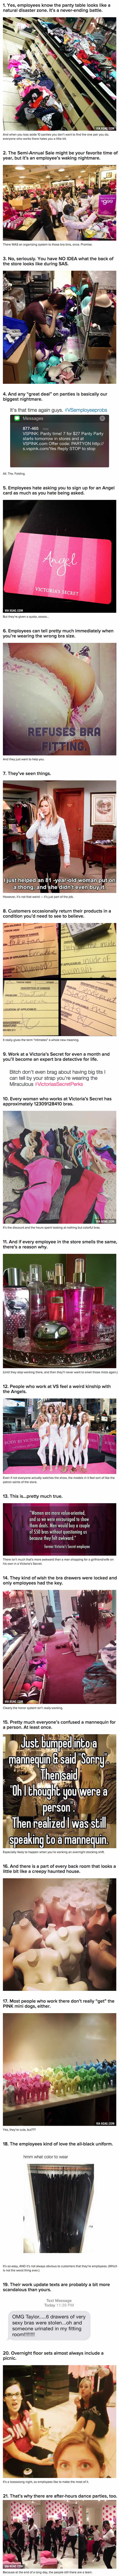 21 secrets victoria's secret employees will never tell you - 9gag